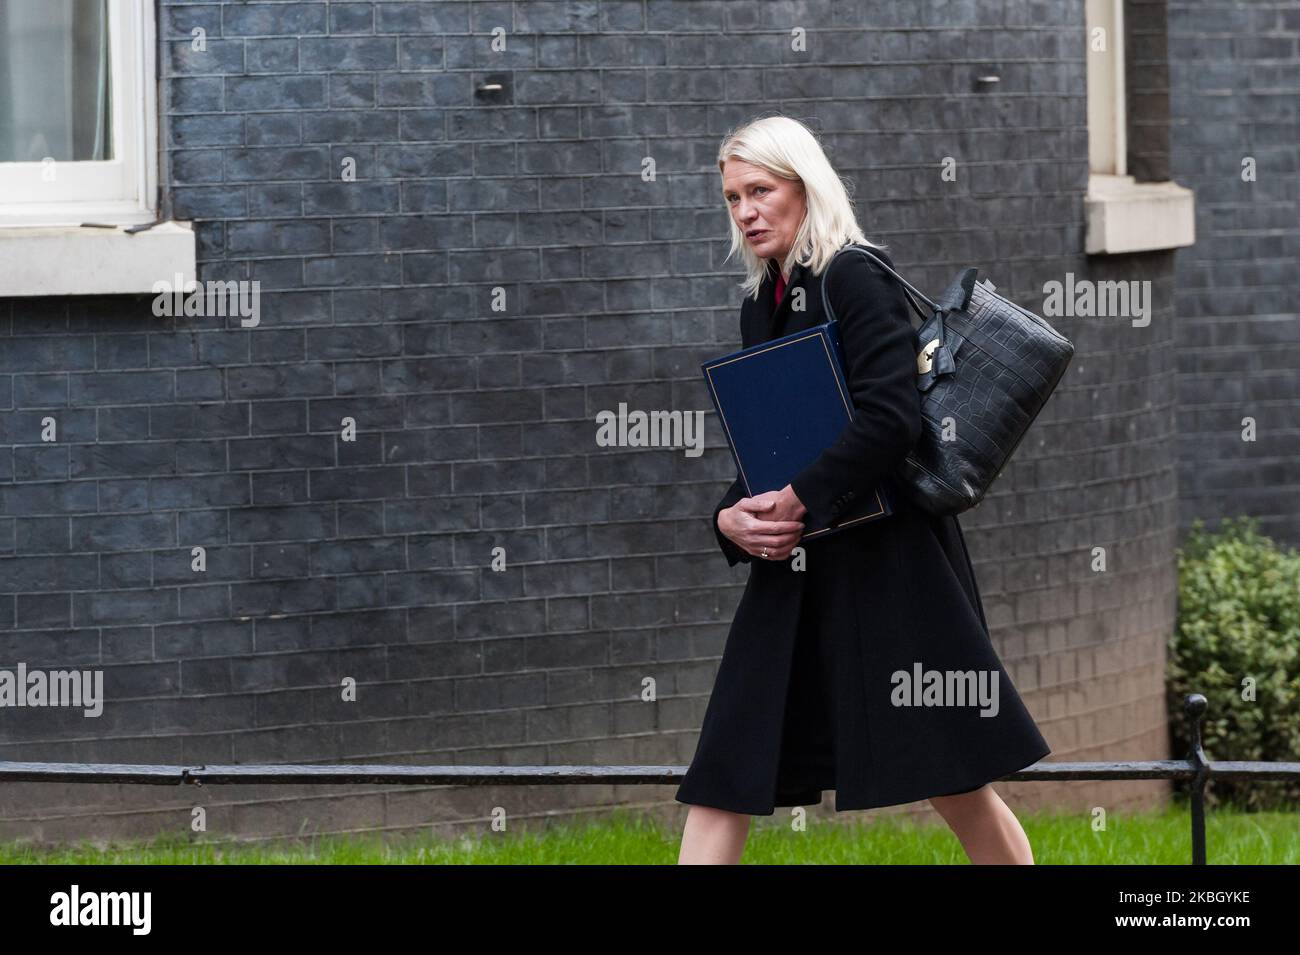 Conservative Party Chairwoman and Minister without Portfolio Amanda Milling arrives in Downing Street in central London to attend a first cabinet meeting after reshuffle on 14 February, 2020 in London, England. Yesterday, Prime Minister Boris Johnson conducted a reshuffle of his government following Britain's departure from the EU. (Photo by WIktor Szymanowicz/NurPhoto) Stock Photo